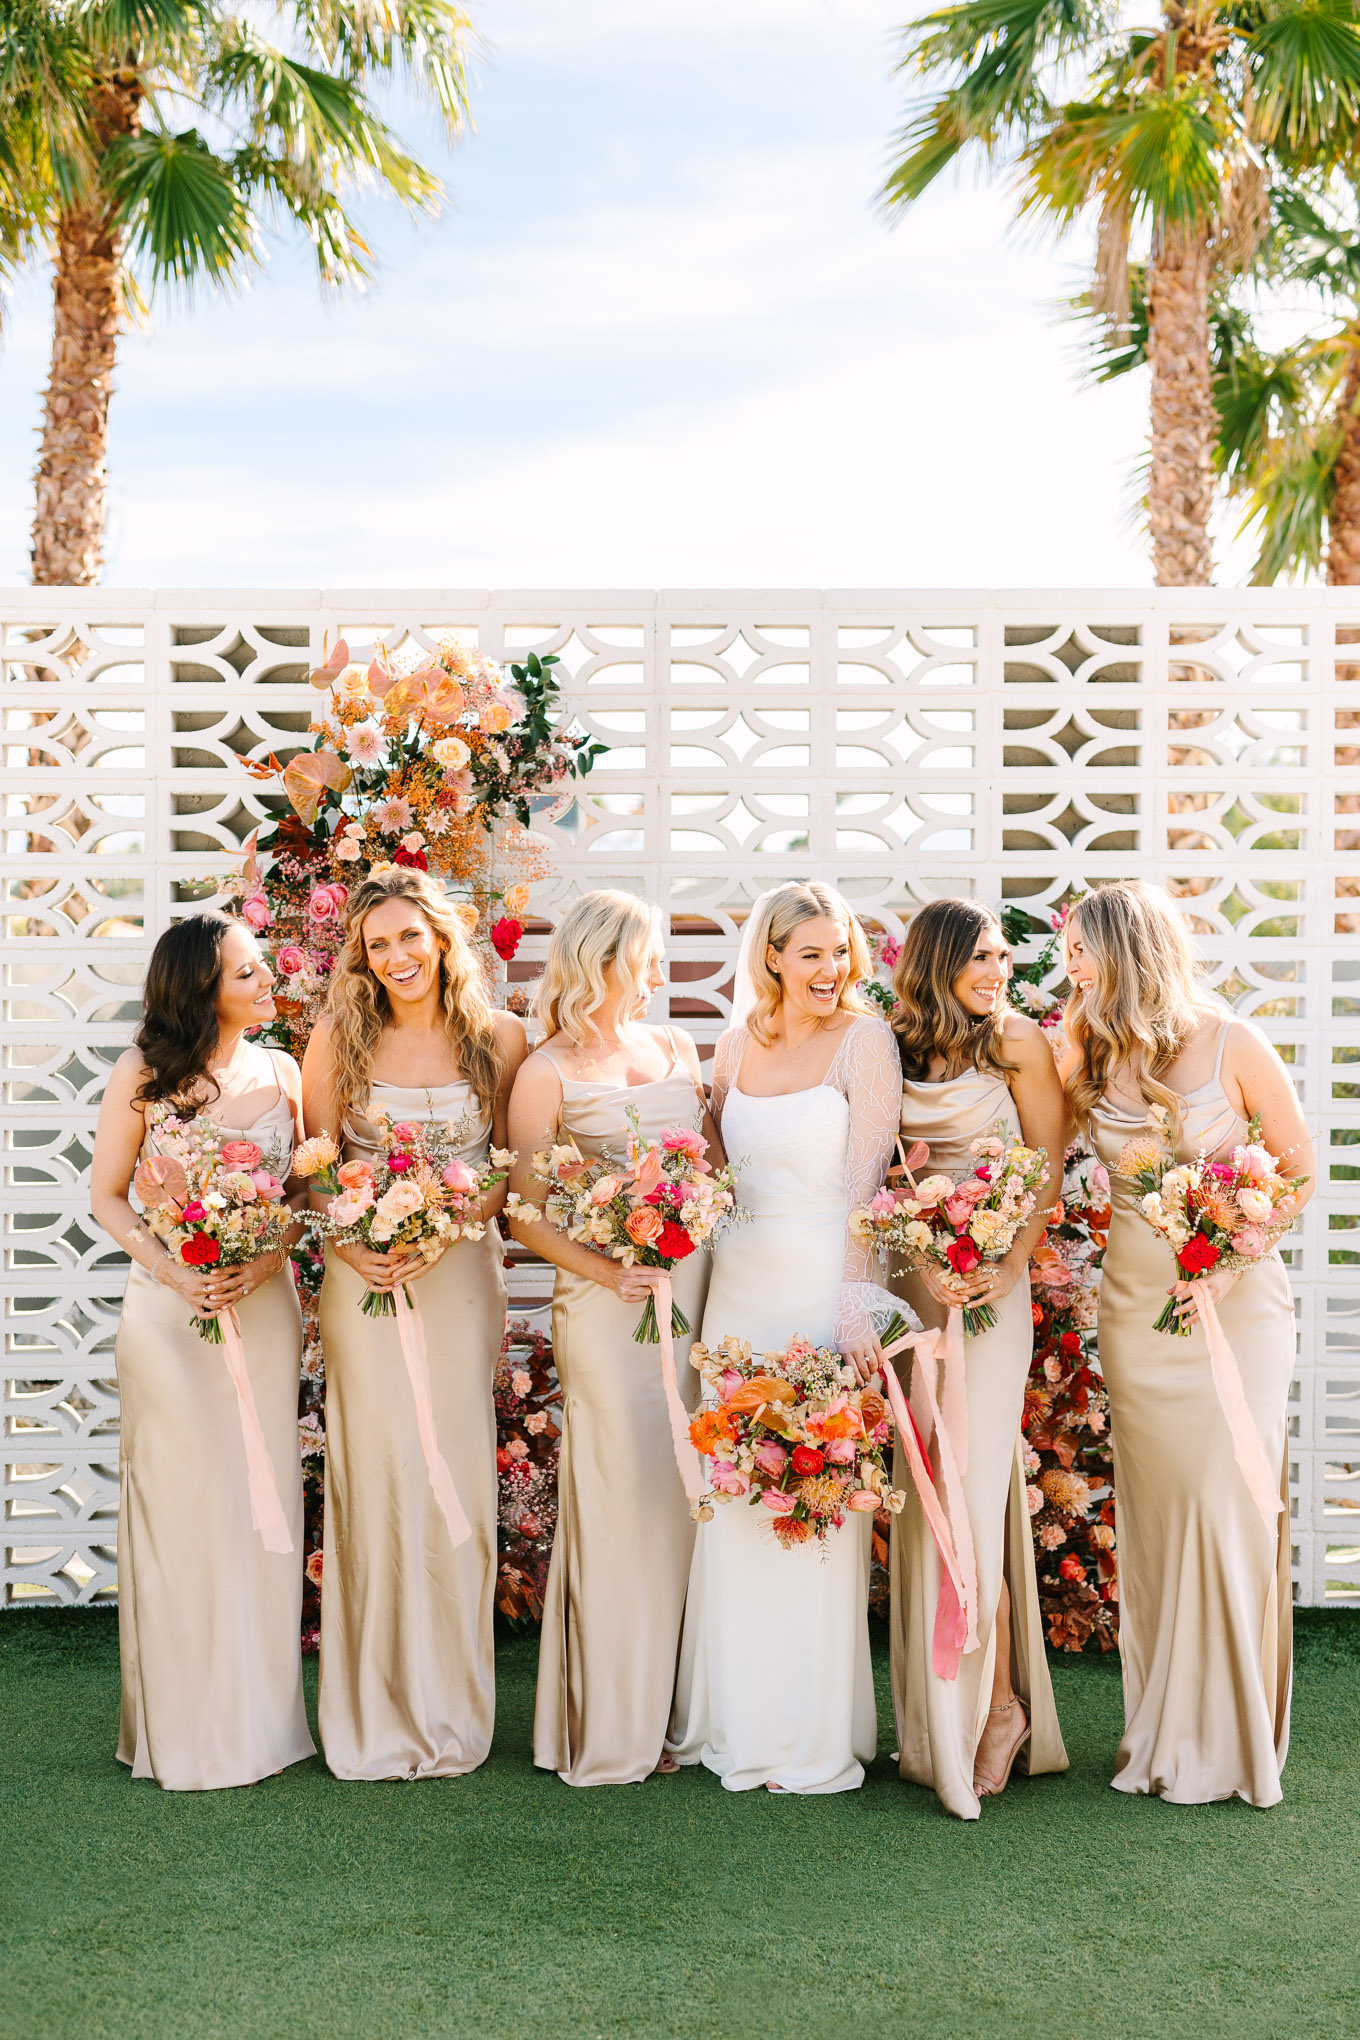 Lautner Compound Wedding | Wedding and elopement photography roundup | Los Angeles and Palm Springs photographer | #losangeleswedding #palmspringswedding #elopementphotographer Source: Mary Costa Photography | Los Angeles